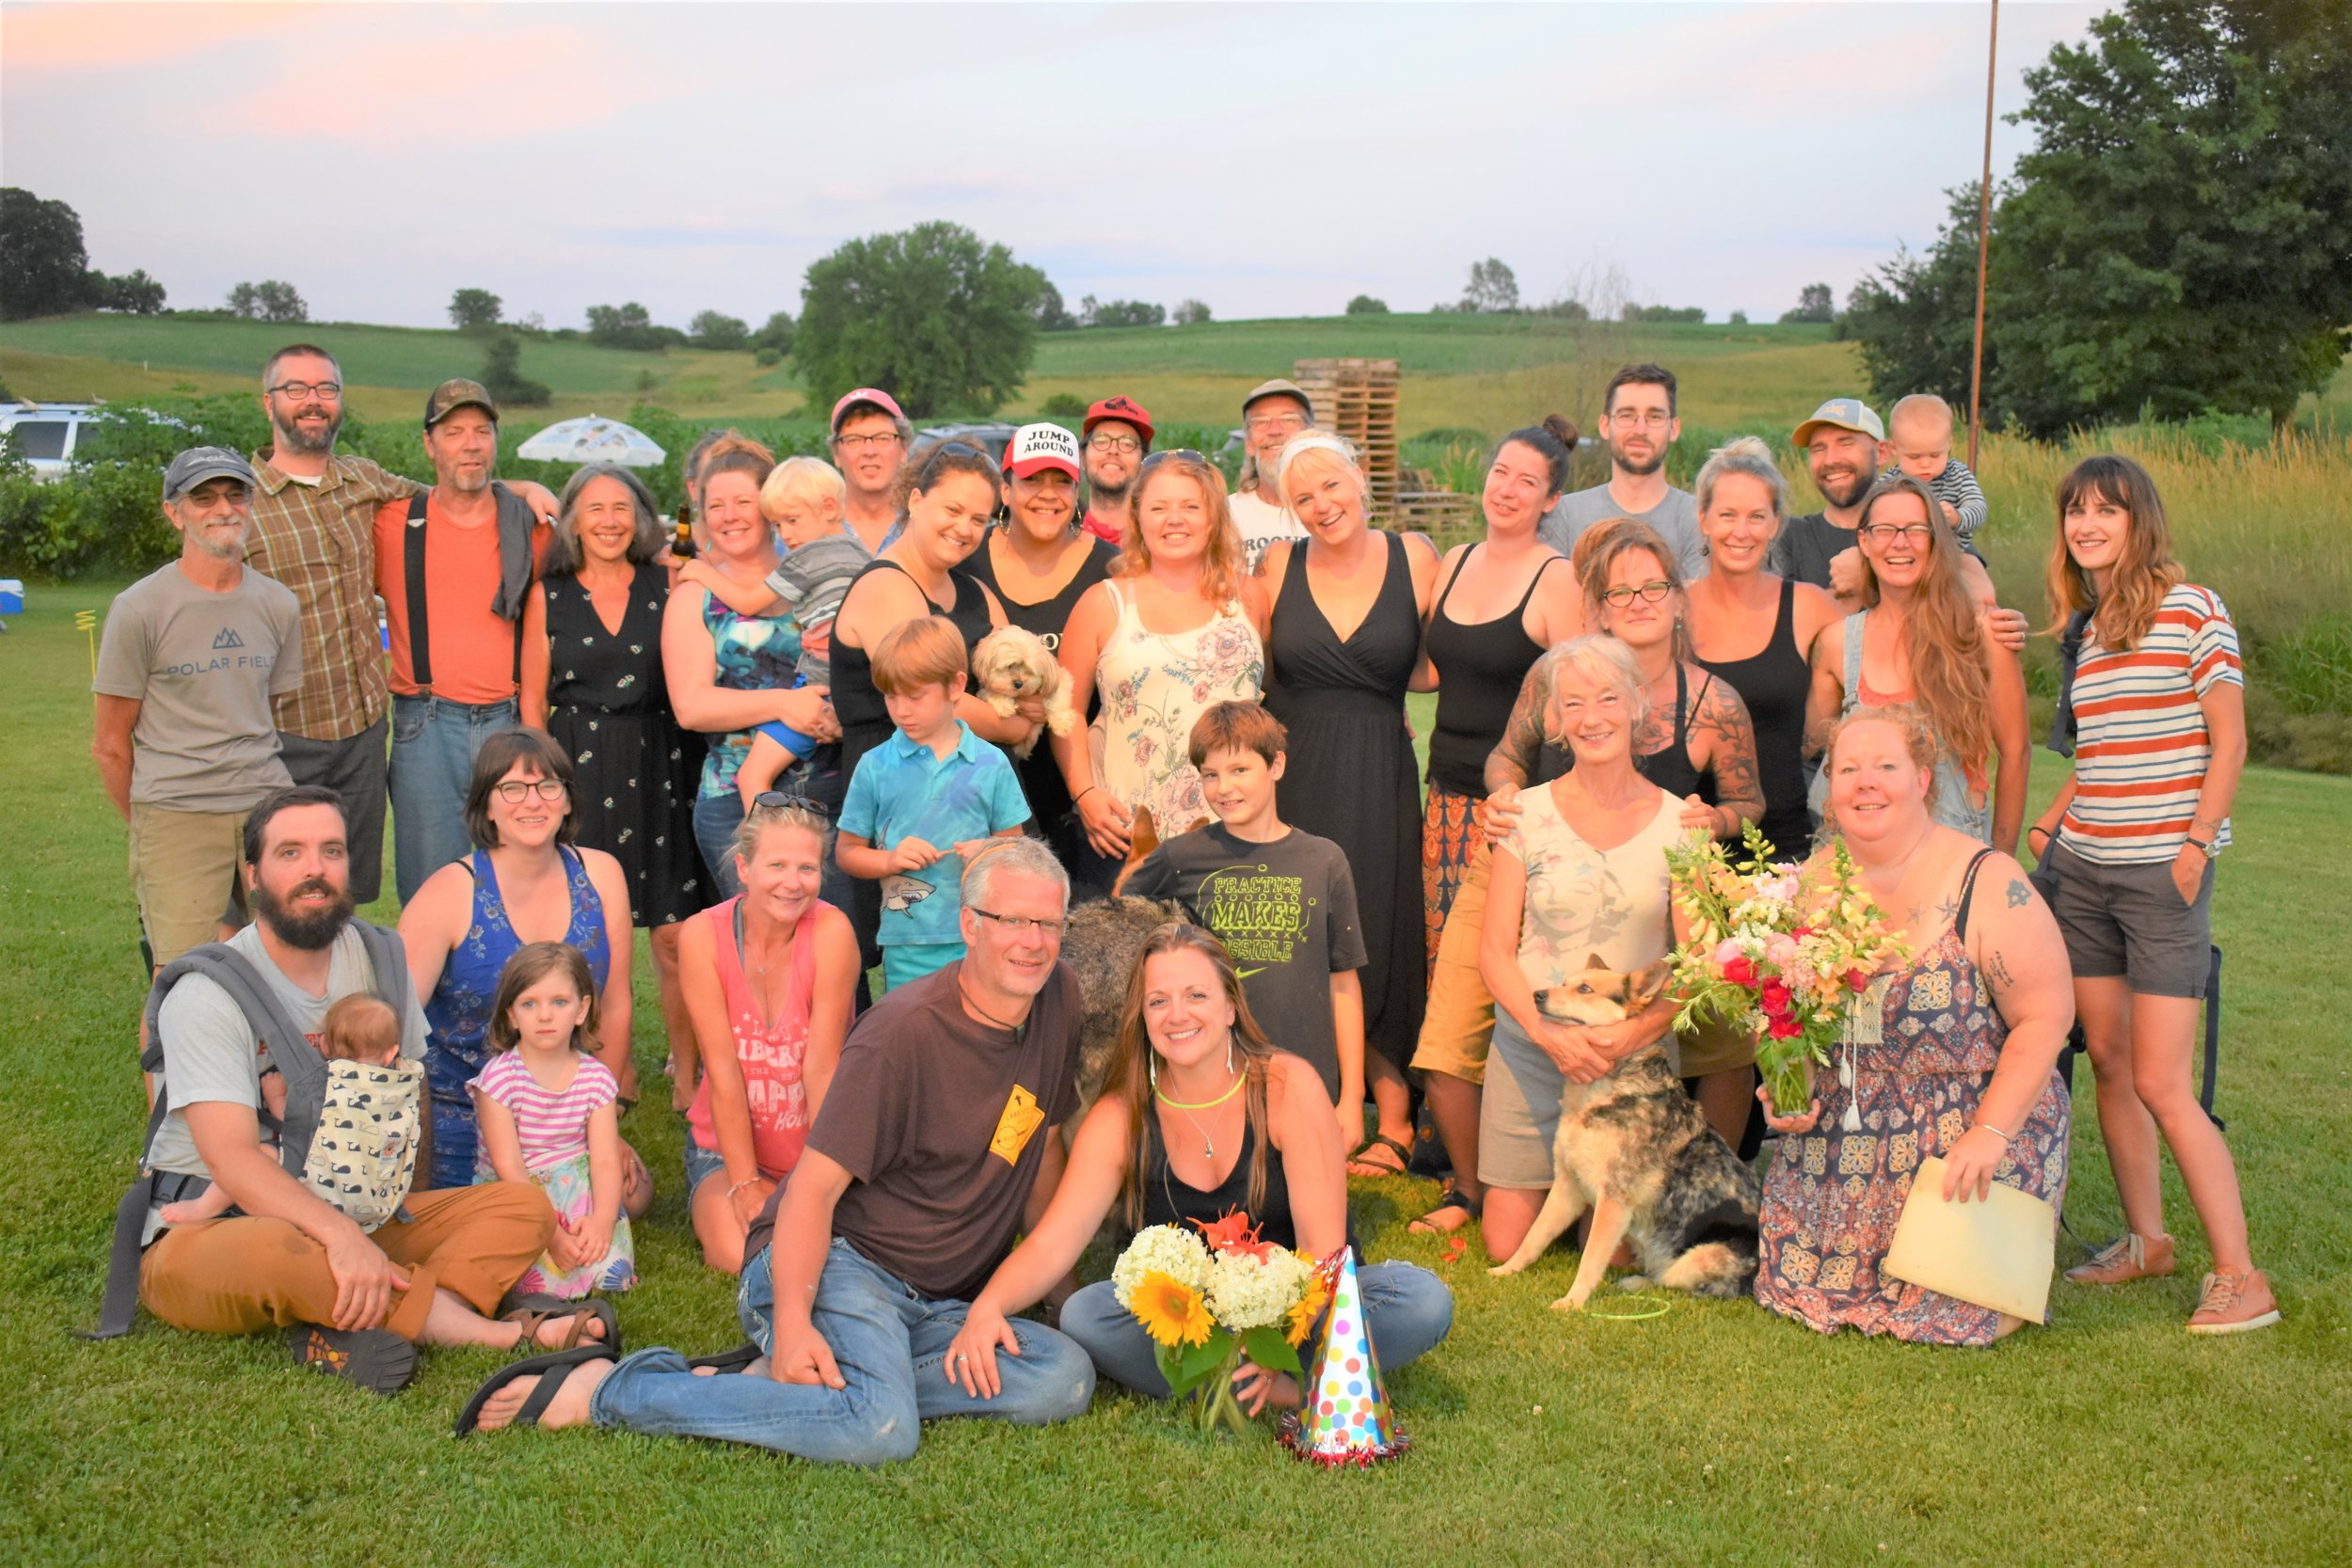  Some of the Kickapoo Valley Croquet Club. In front and center, l to r are Kya and Fiance Morgan, who happened to be celebrating a birthday that evening. 